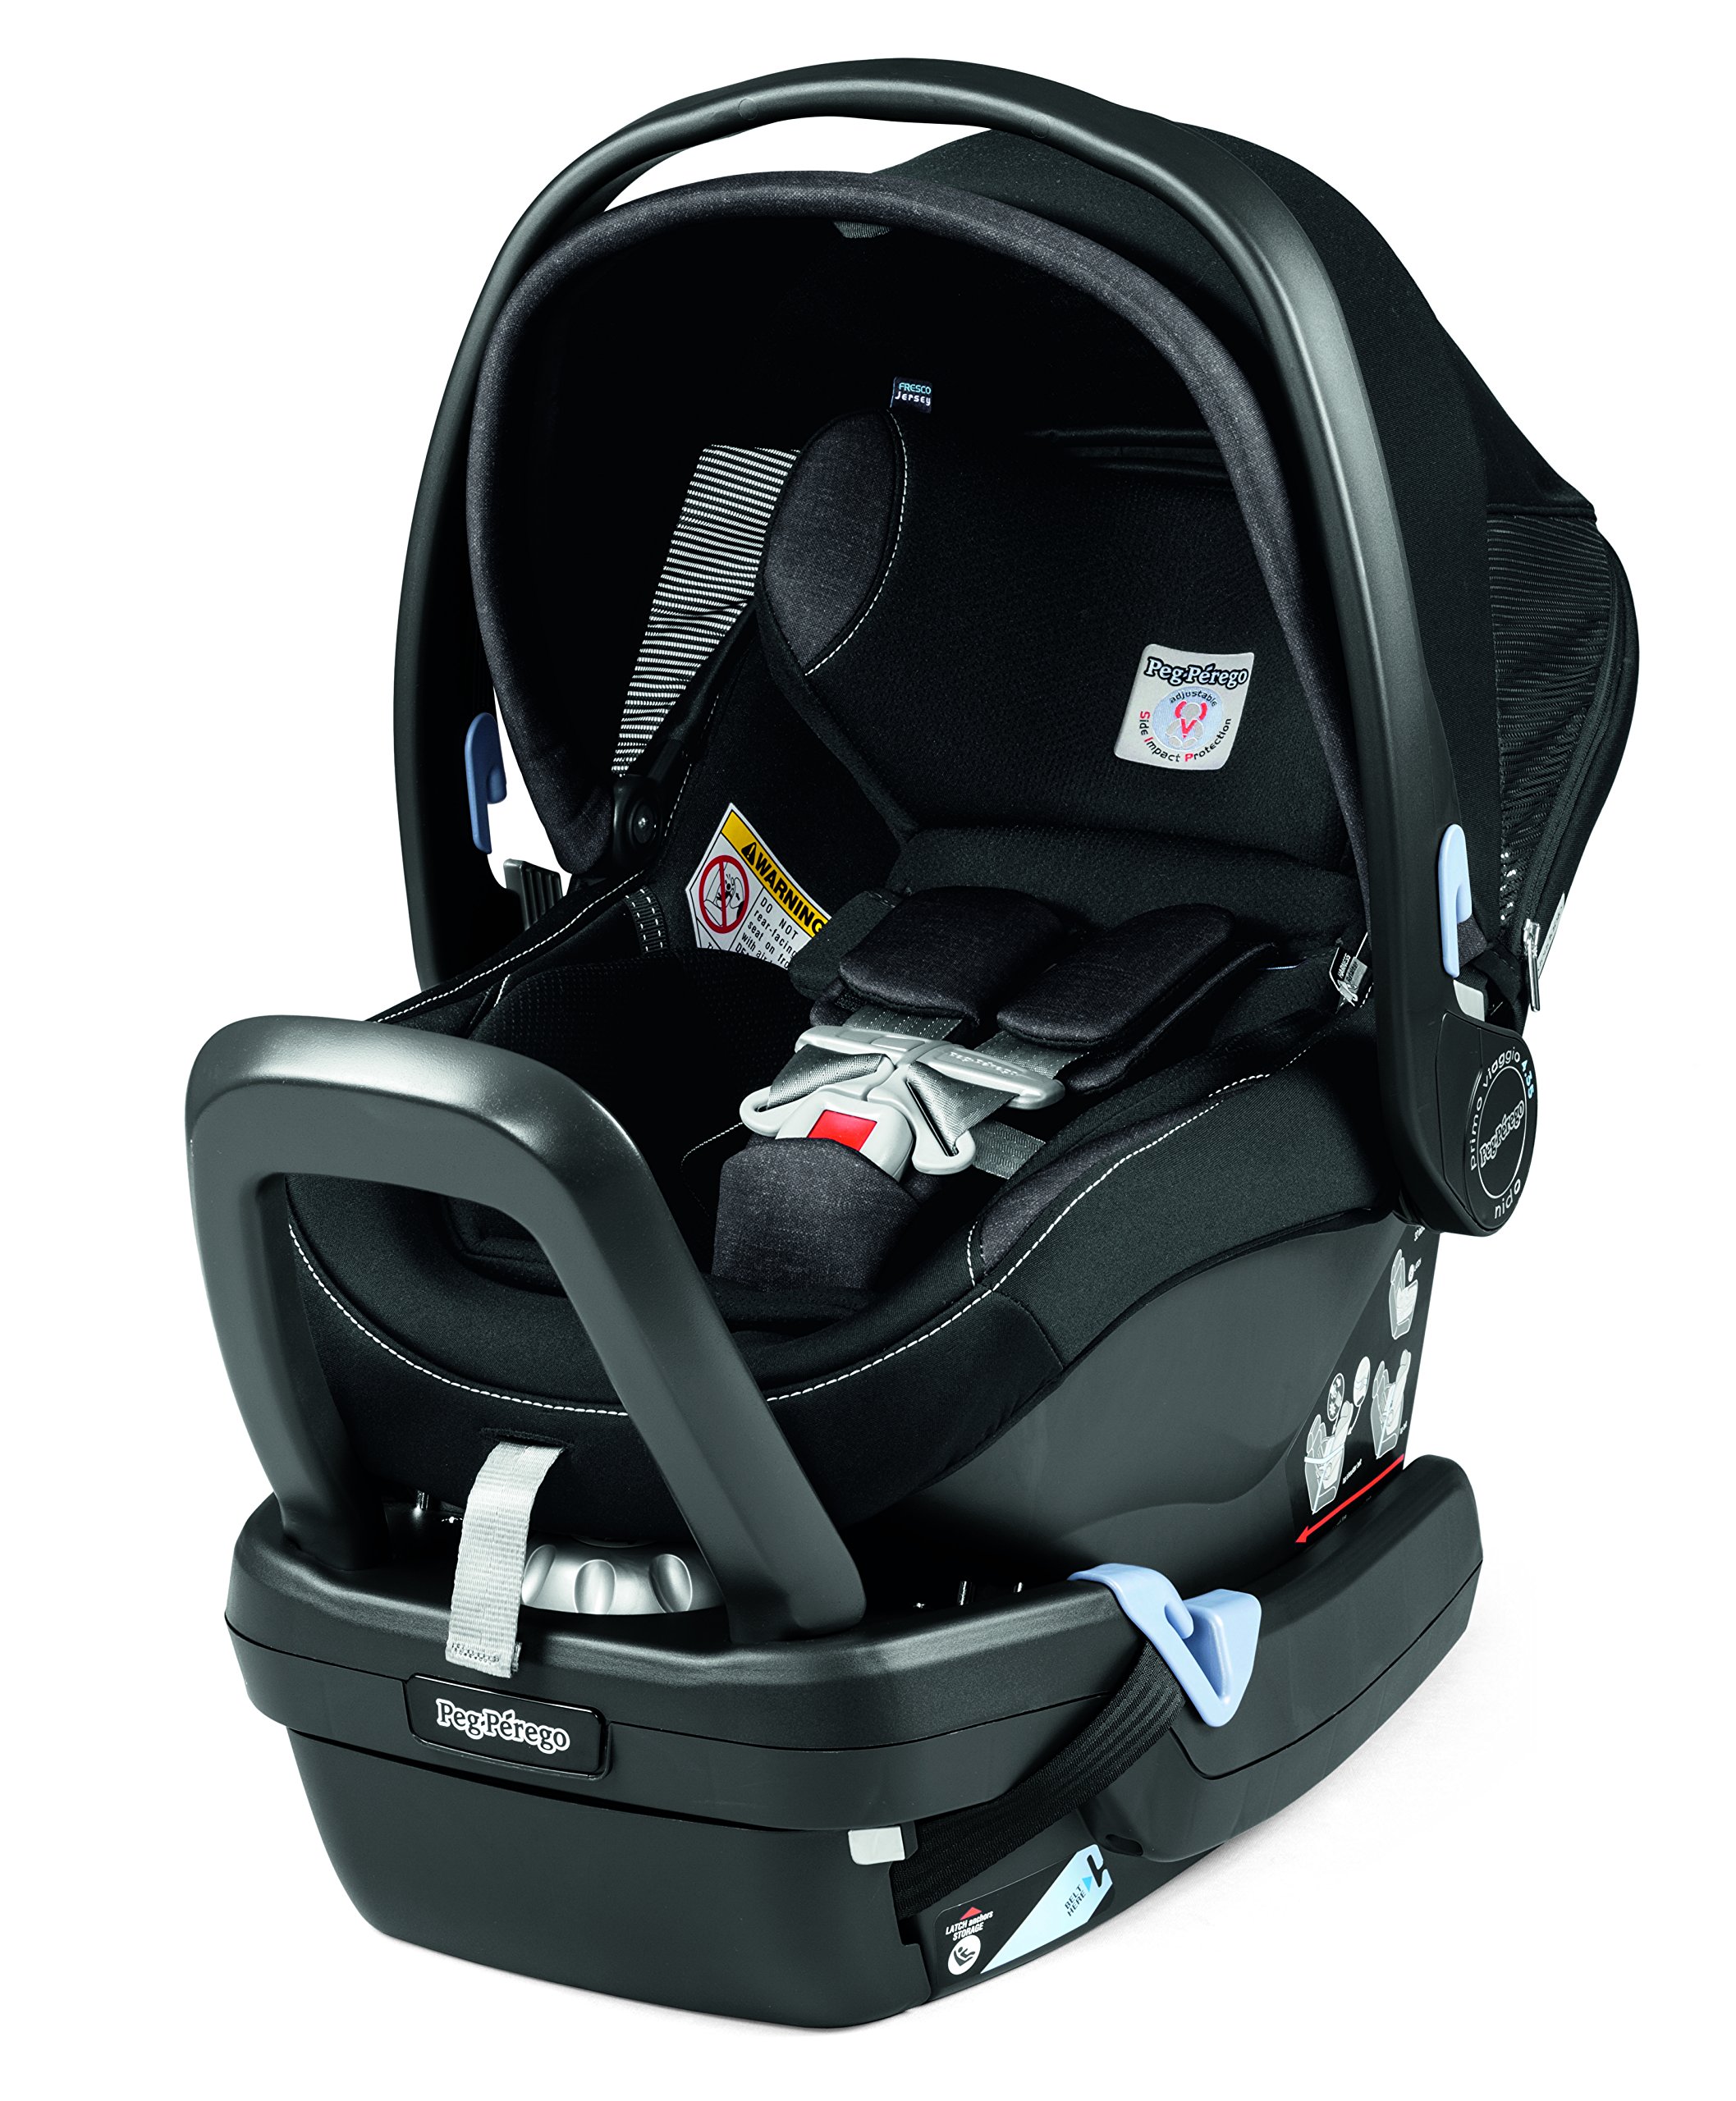 Peg Perego Ypsi Travel System - Includes Ypsi Lightweight Reversible Stroller and Primo Viaggio 4-35 Nido Infant Car Seat - Made in Italy - Onyx (Black)